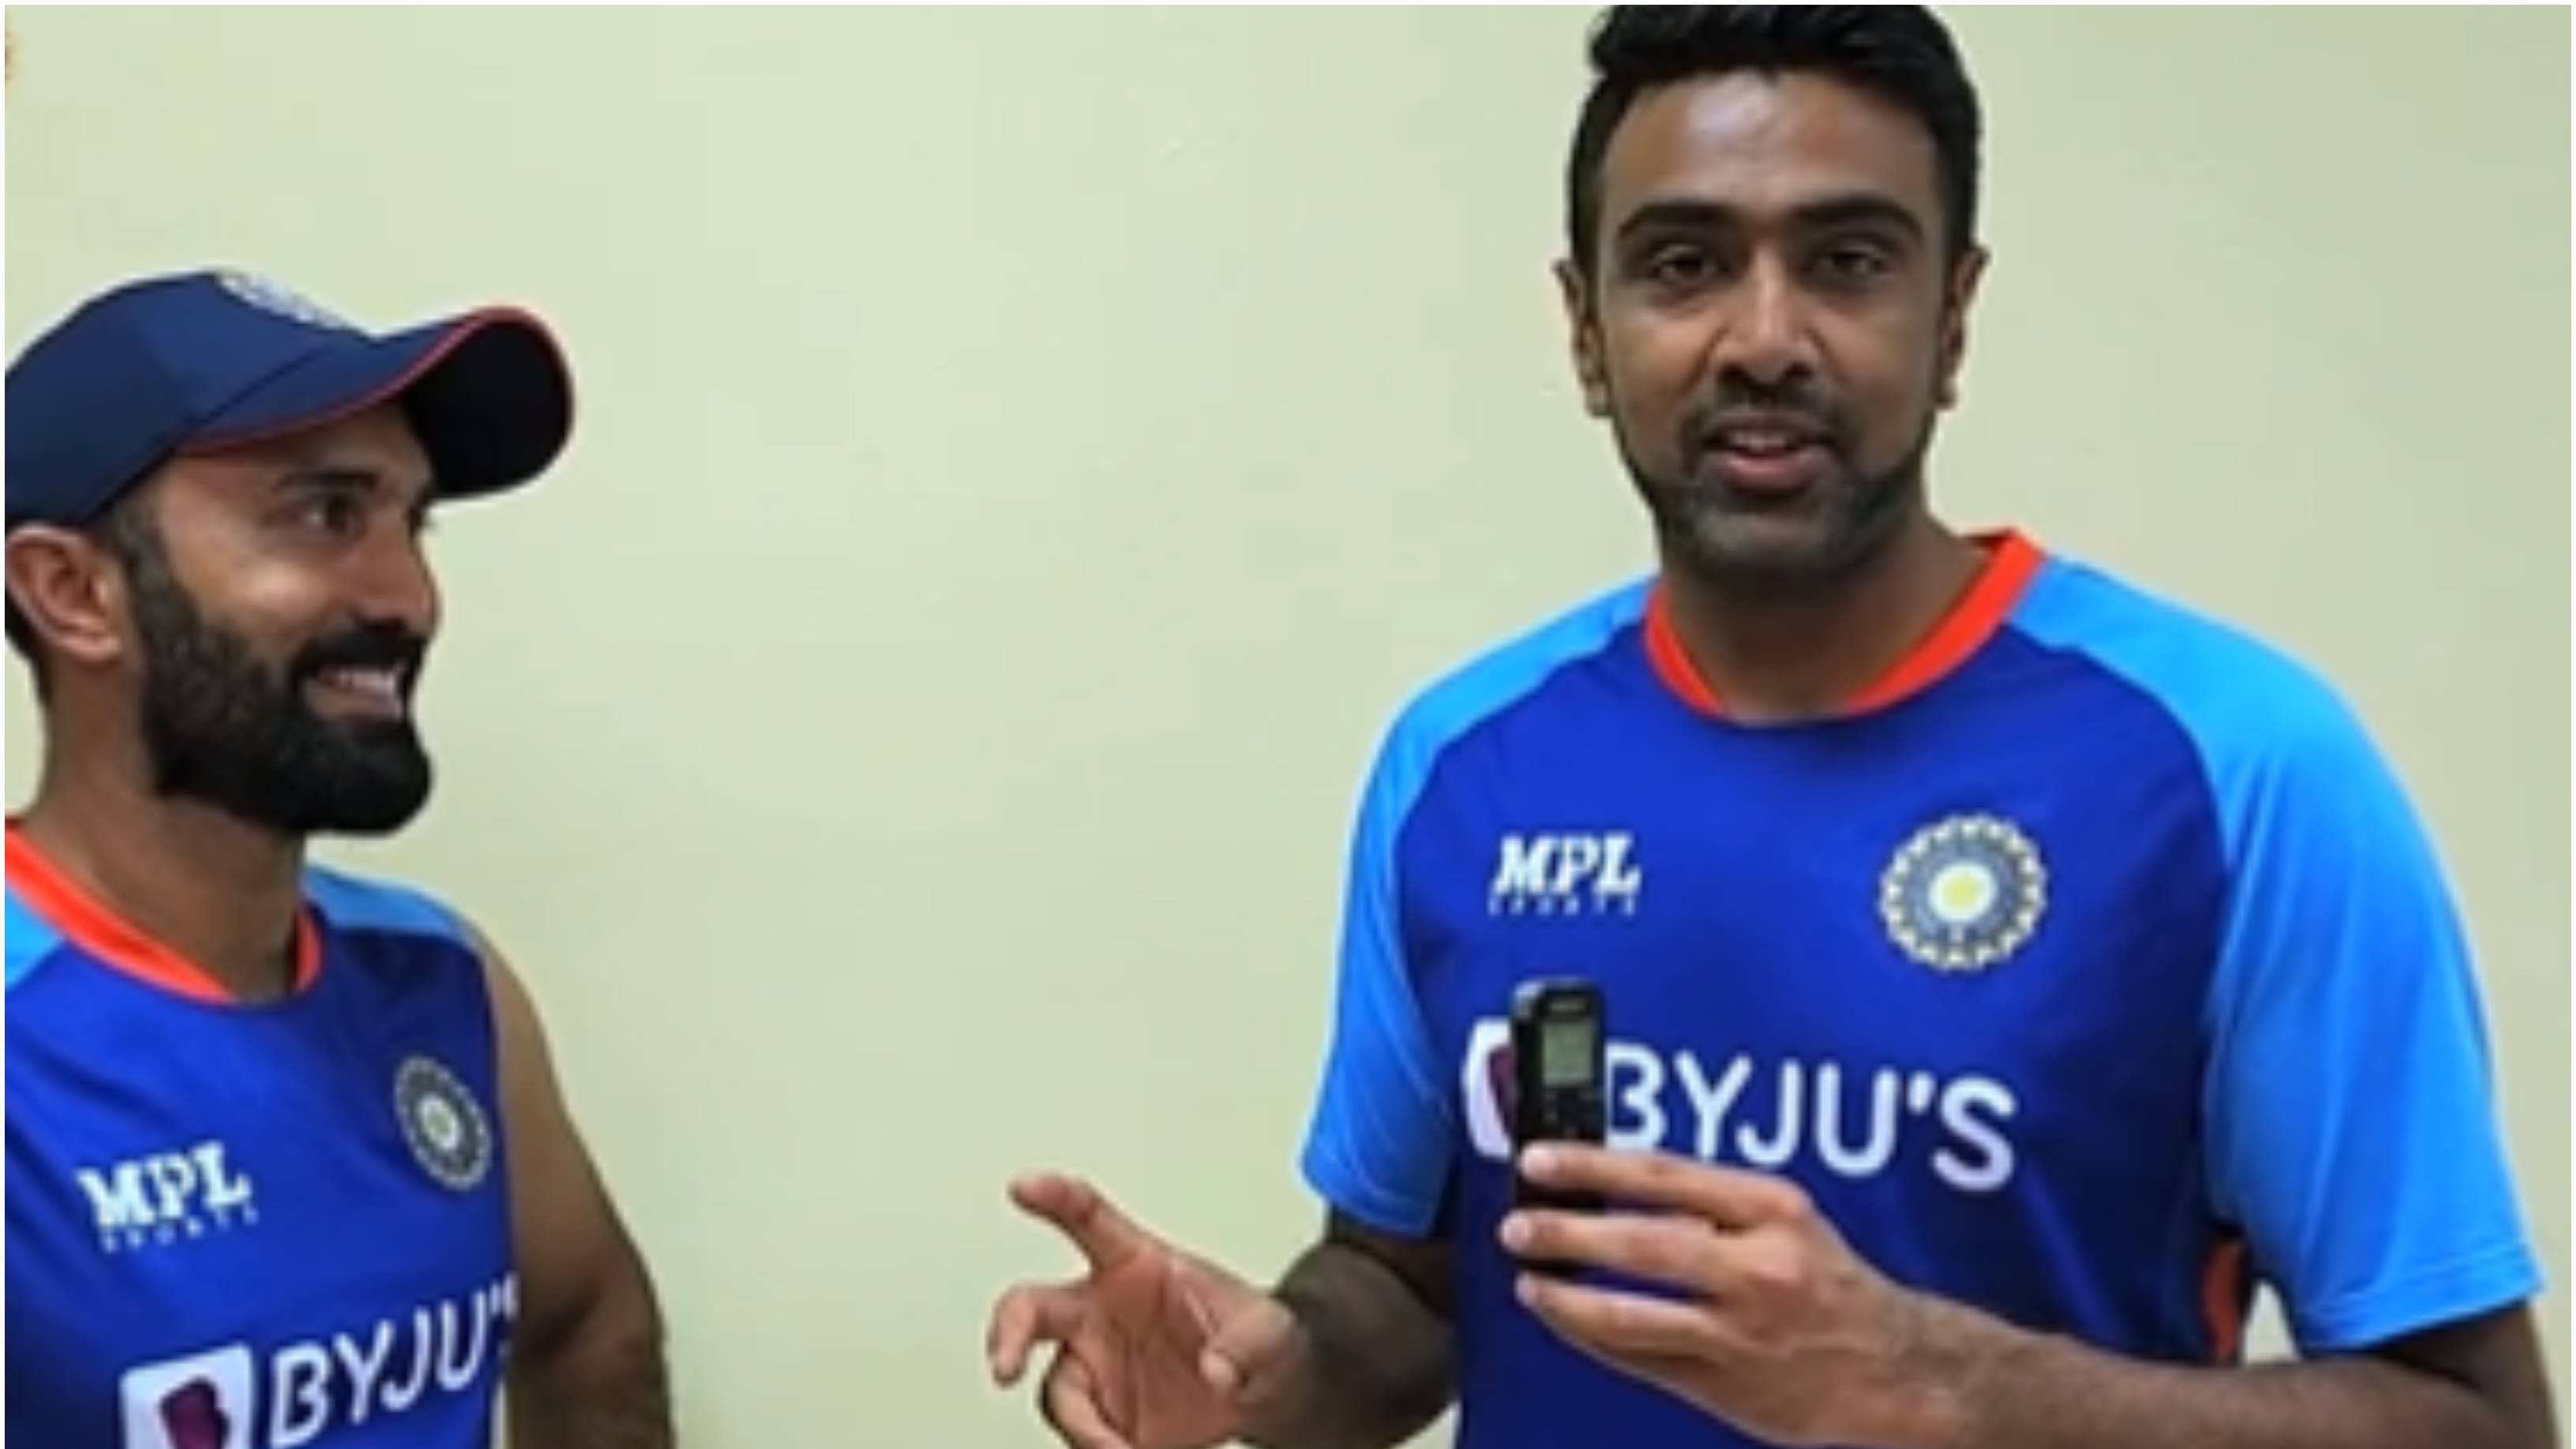 WI v IND 2022: WATCH – “I have been working on my batting”, Ashwin interacts with Karthik after 1st T20I